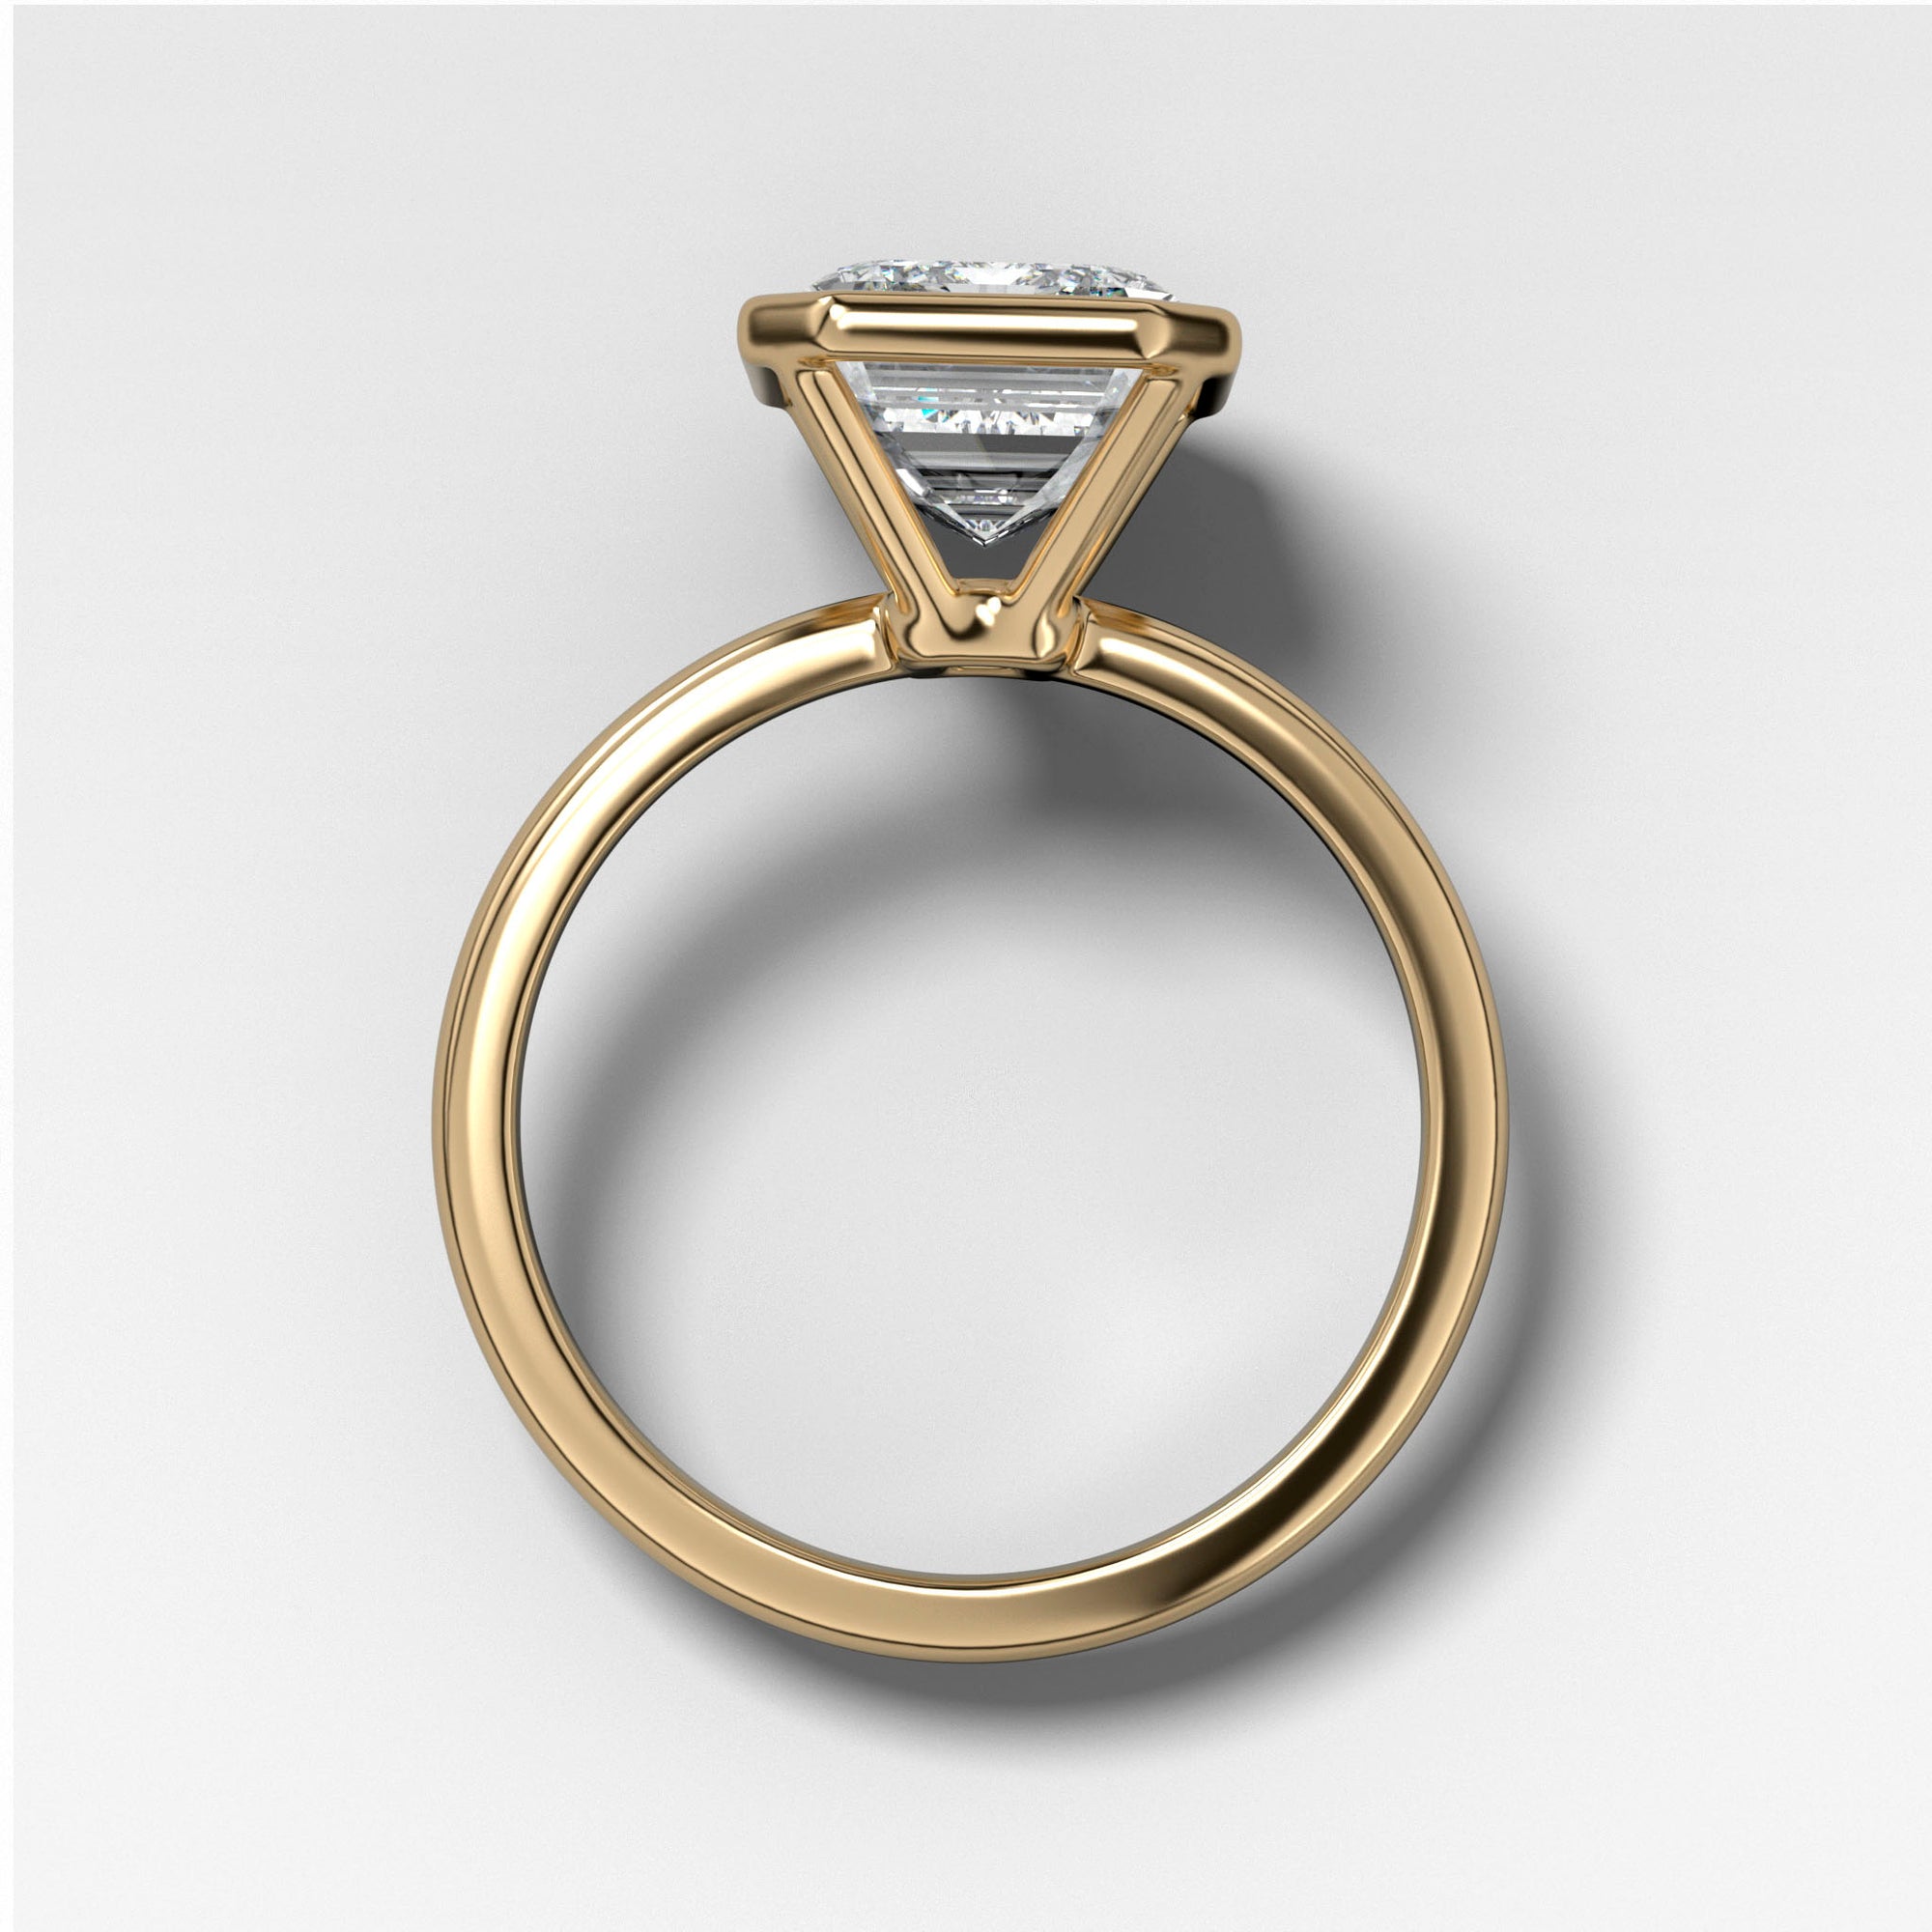 Bezel Penumbra Solitaire With Emerald Cut in Yellow Gold by Good Stone